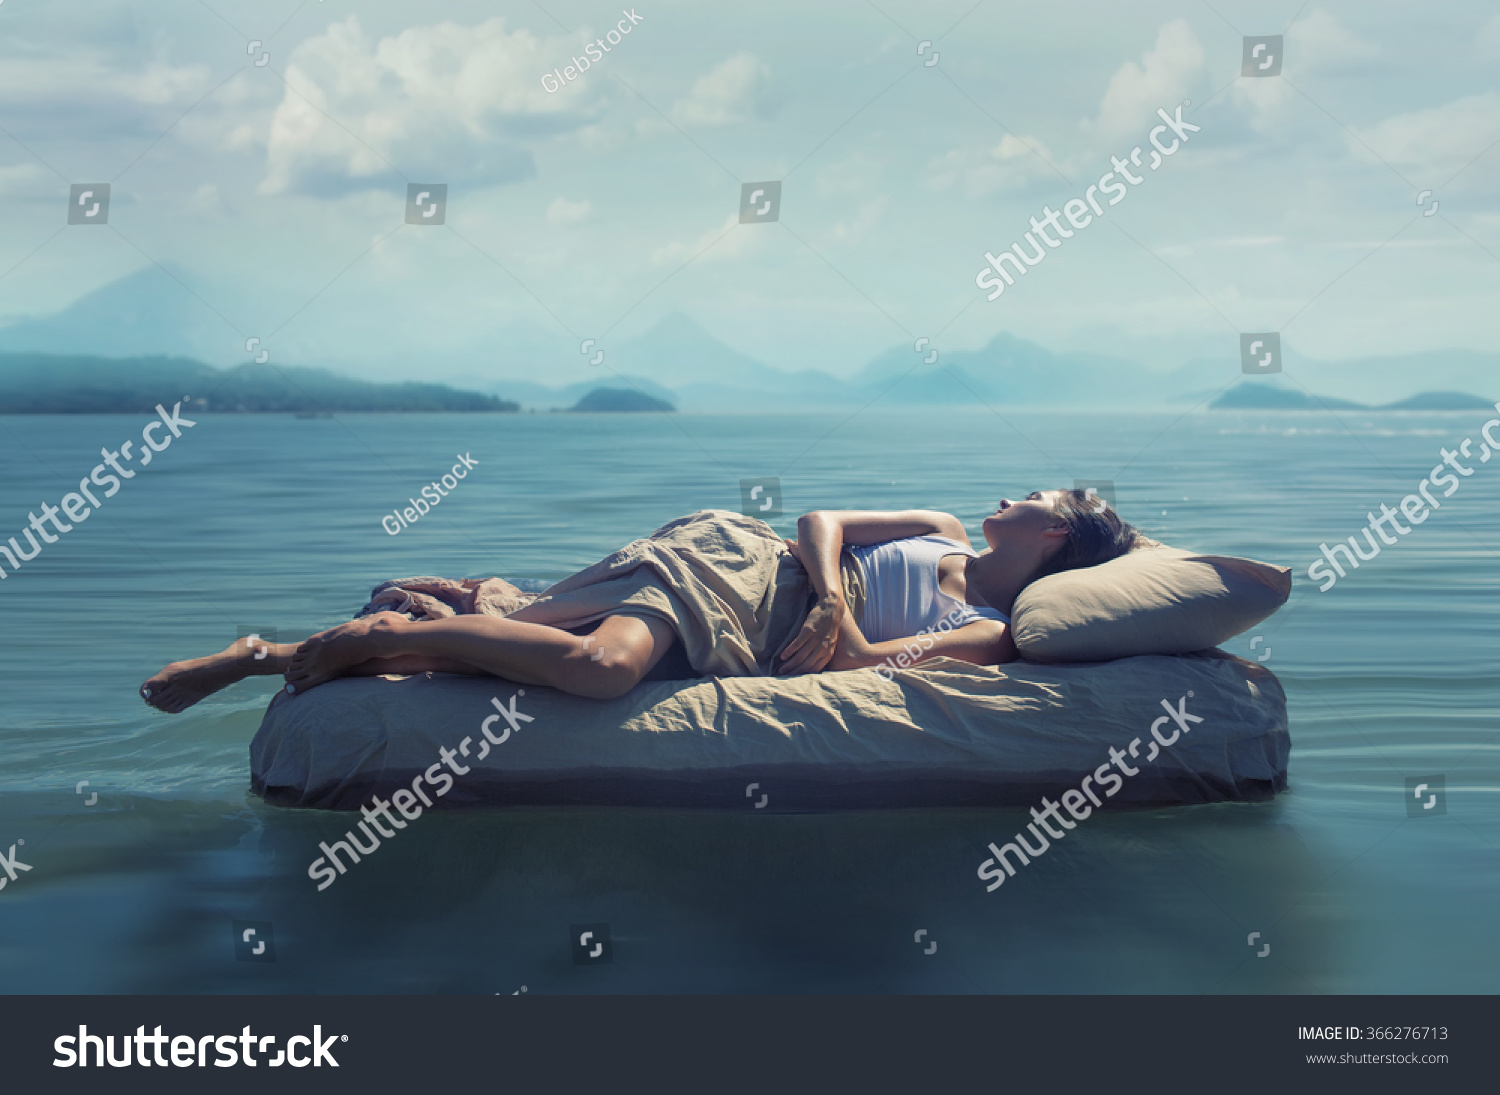 Sleeping woman lies on airbed in water. #366276713